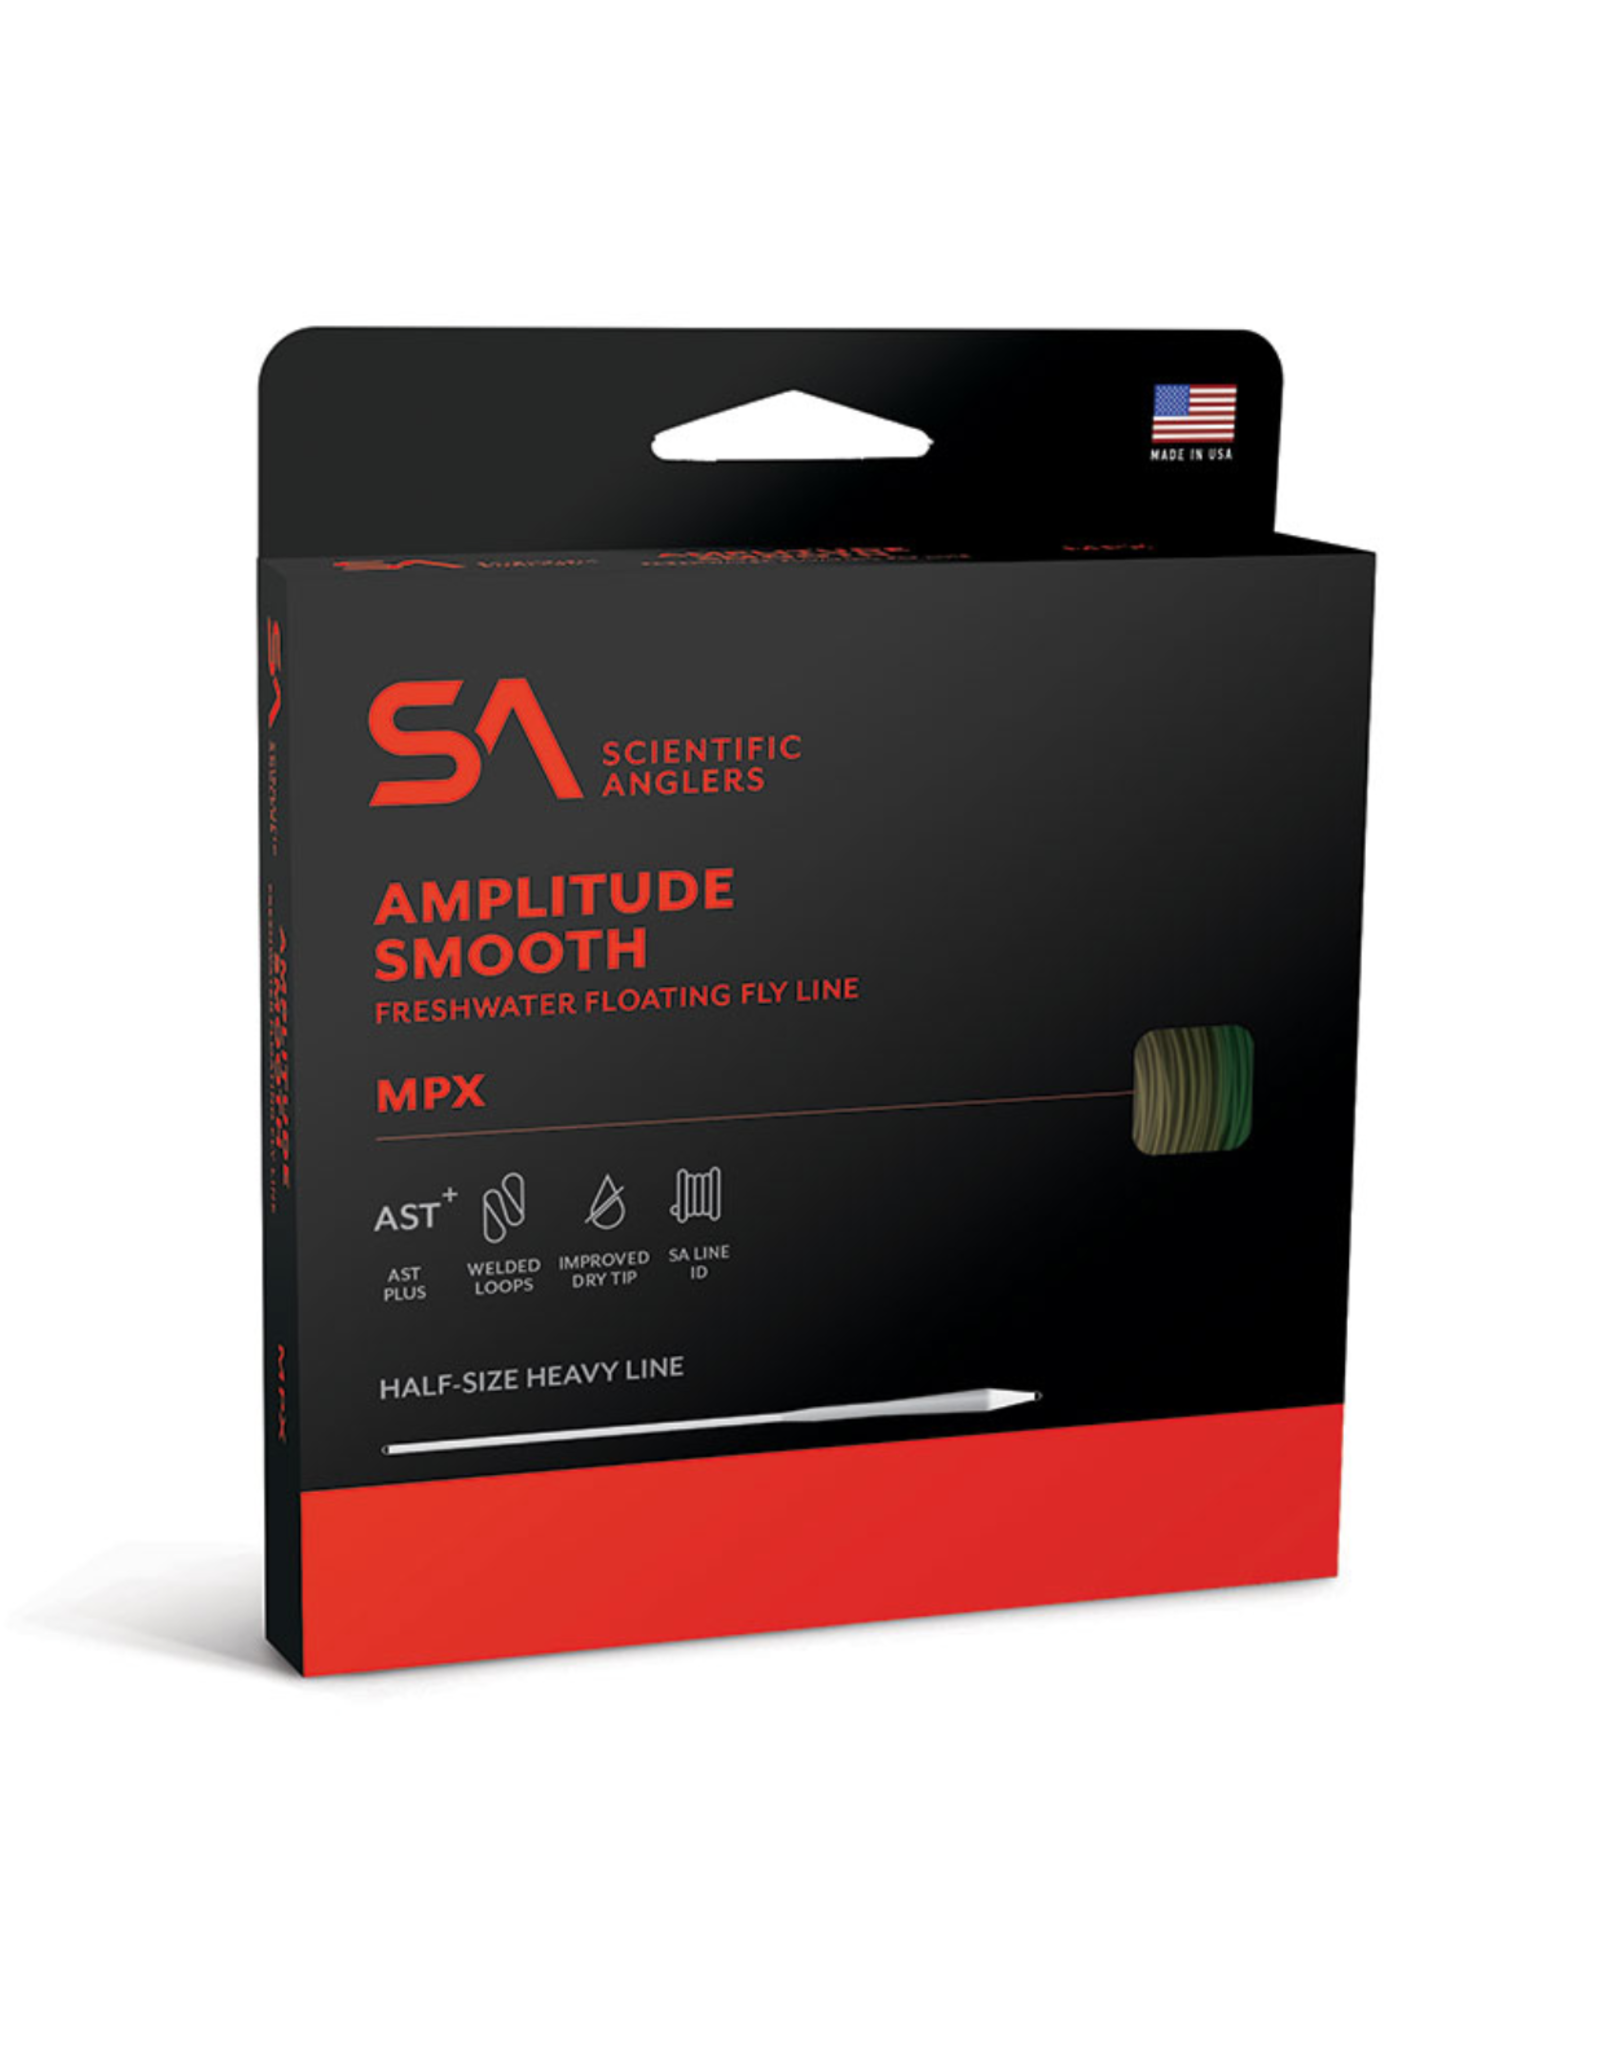 Scientific Anglers SA - Amplitude Smooth MPX Fly Line